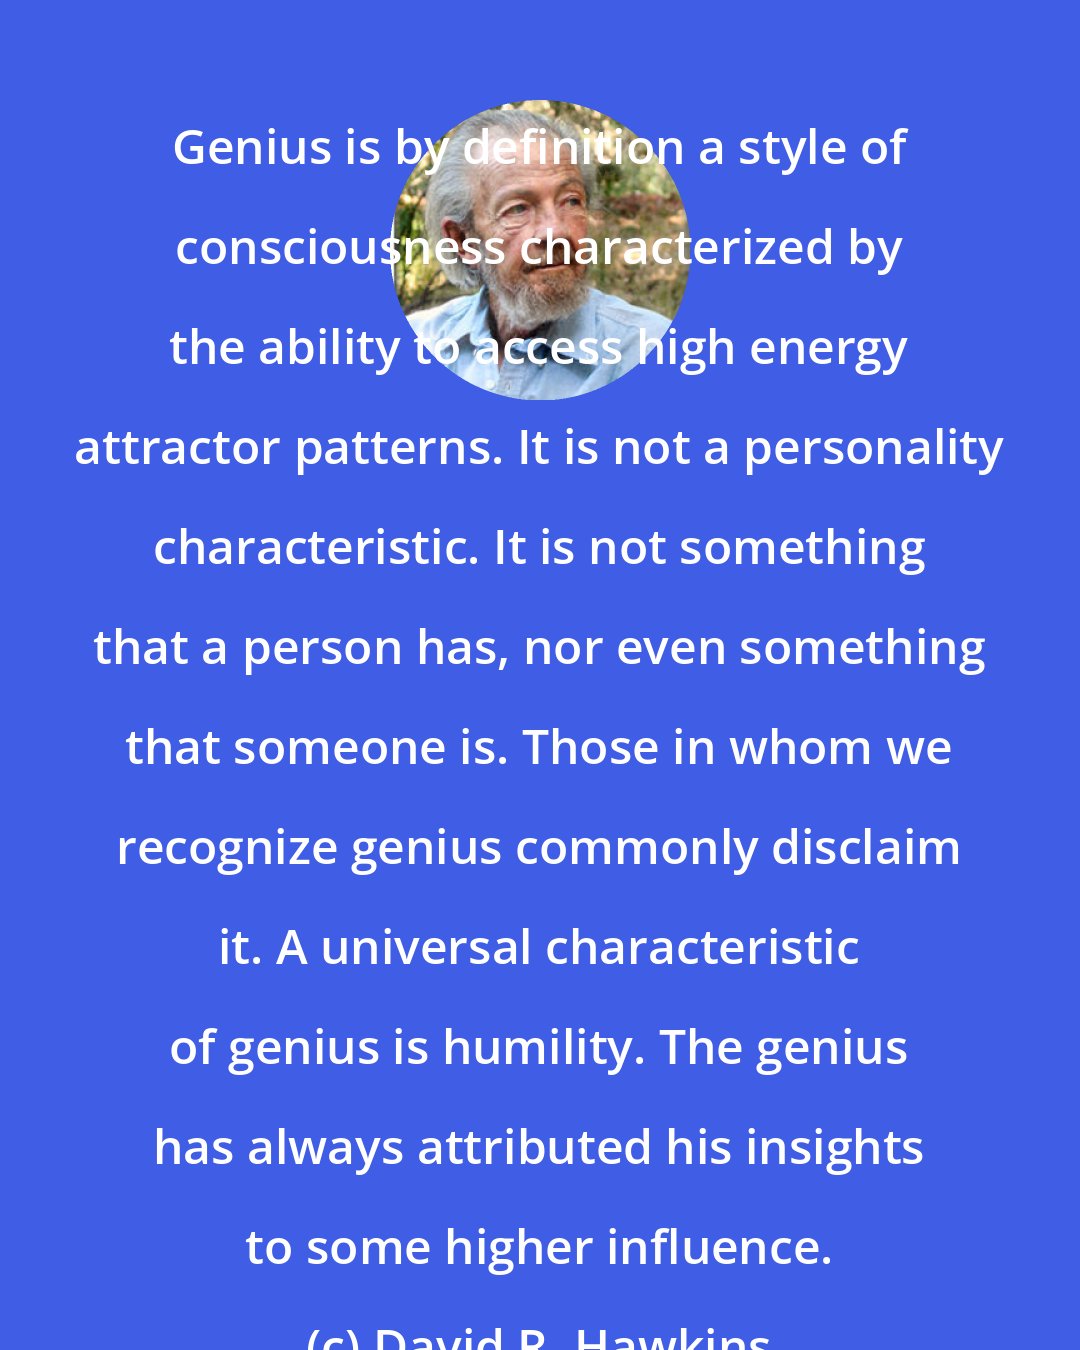 David R. Hawkins: Genius is by definition a style of consciousness characterized by the ability to access high energy attractor patterns. It is not a personality characteristic. It is not something that a person has, nor even something that someone is. Those in whom we recognize genius commonly disclaim it. A universal characteristic of genius is humility. The genius has always attributed his insights to some higher influence.